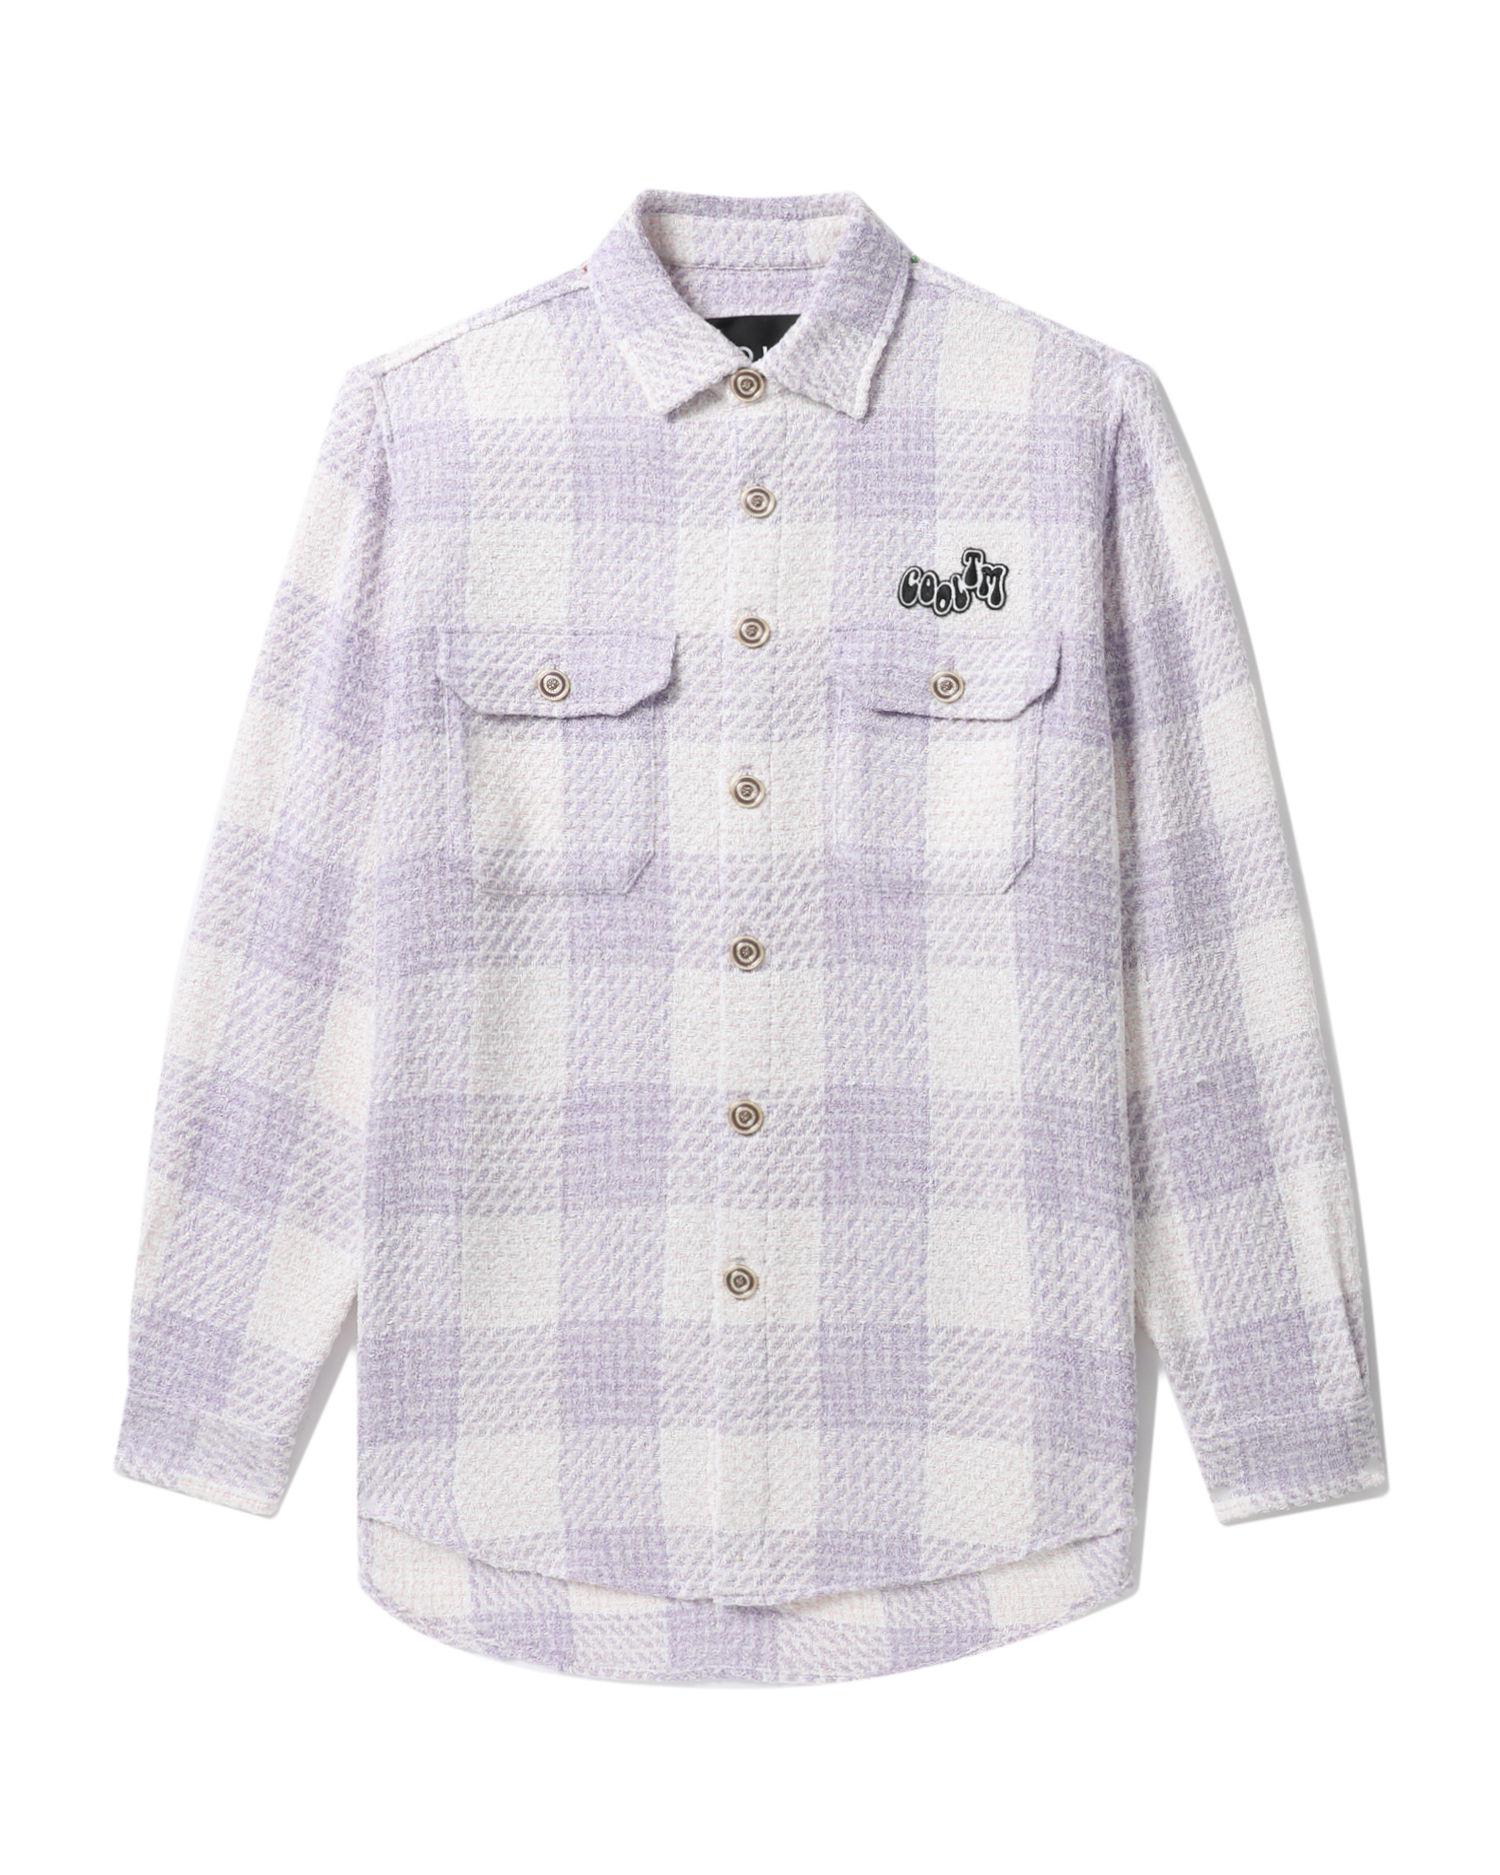 Oversized logo check shirt by COOL T.M